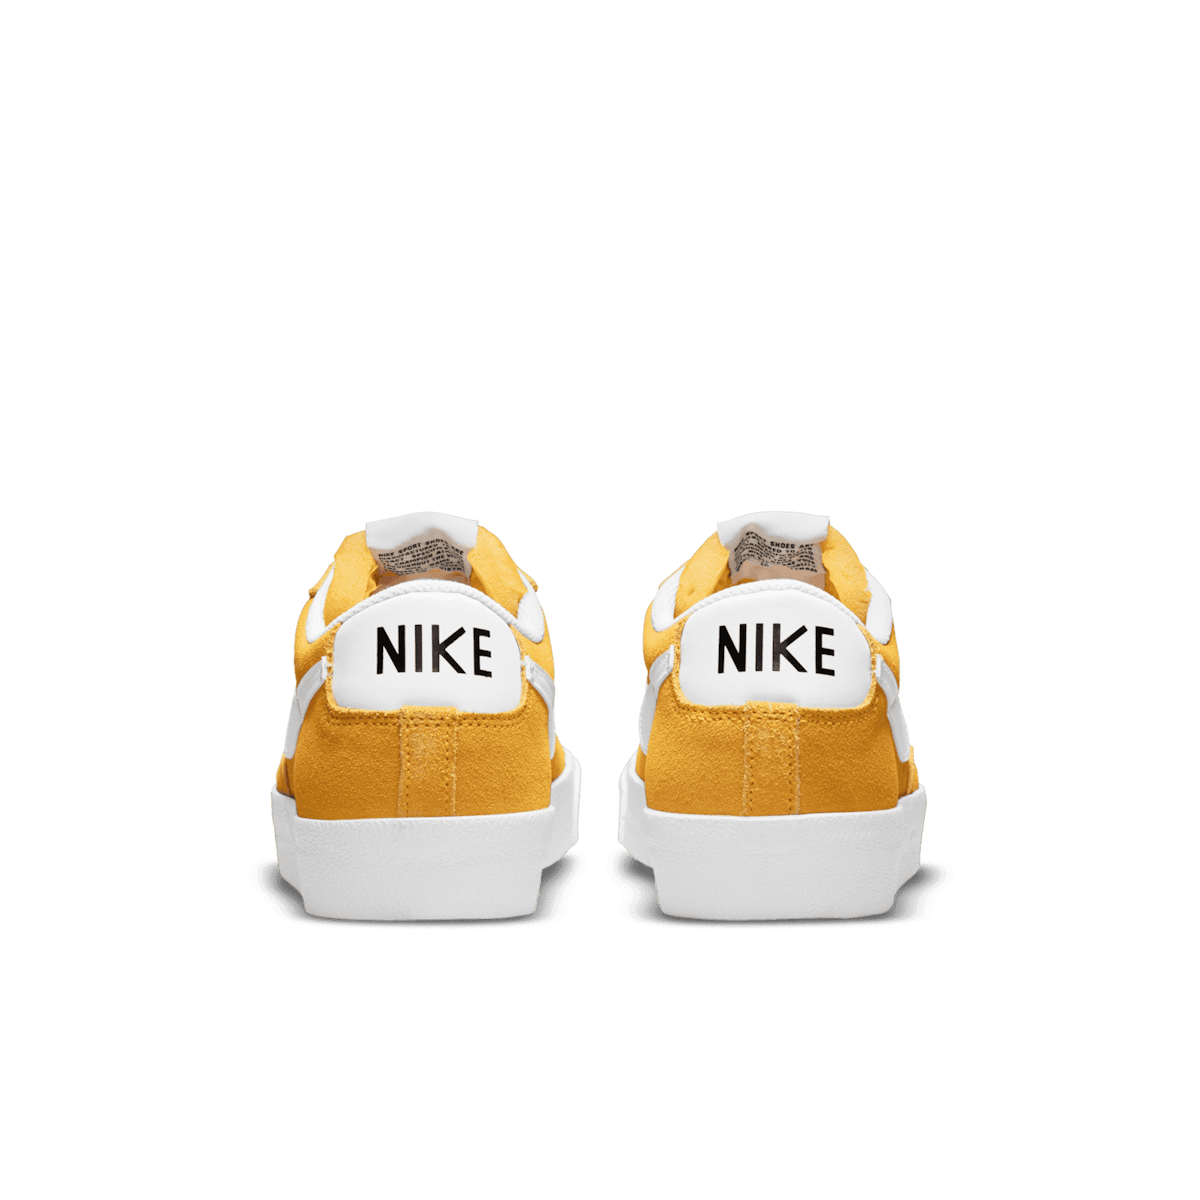 Nike Blazer Low '77 Shoes in Yellow Angle 3